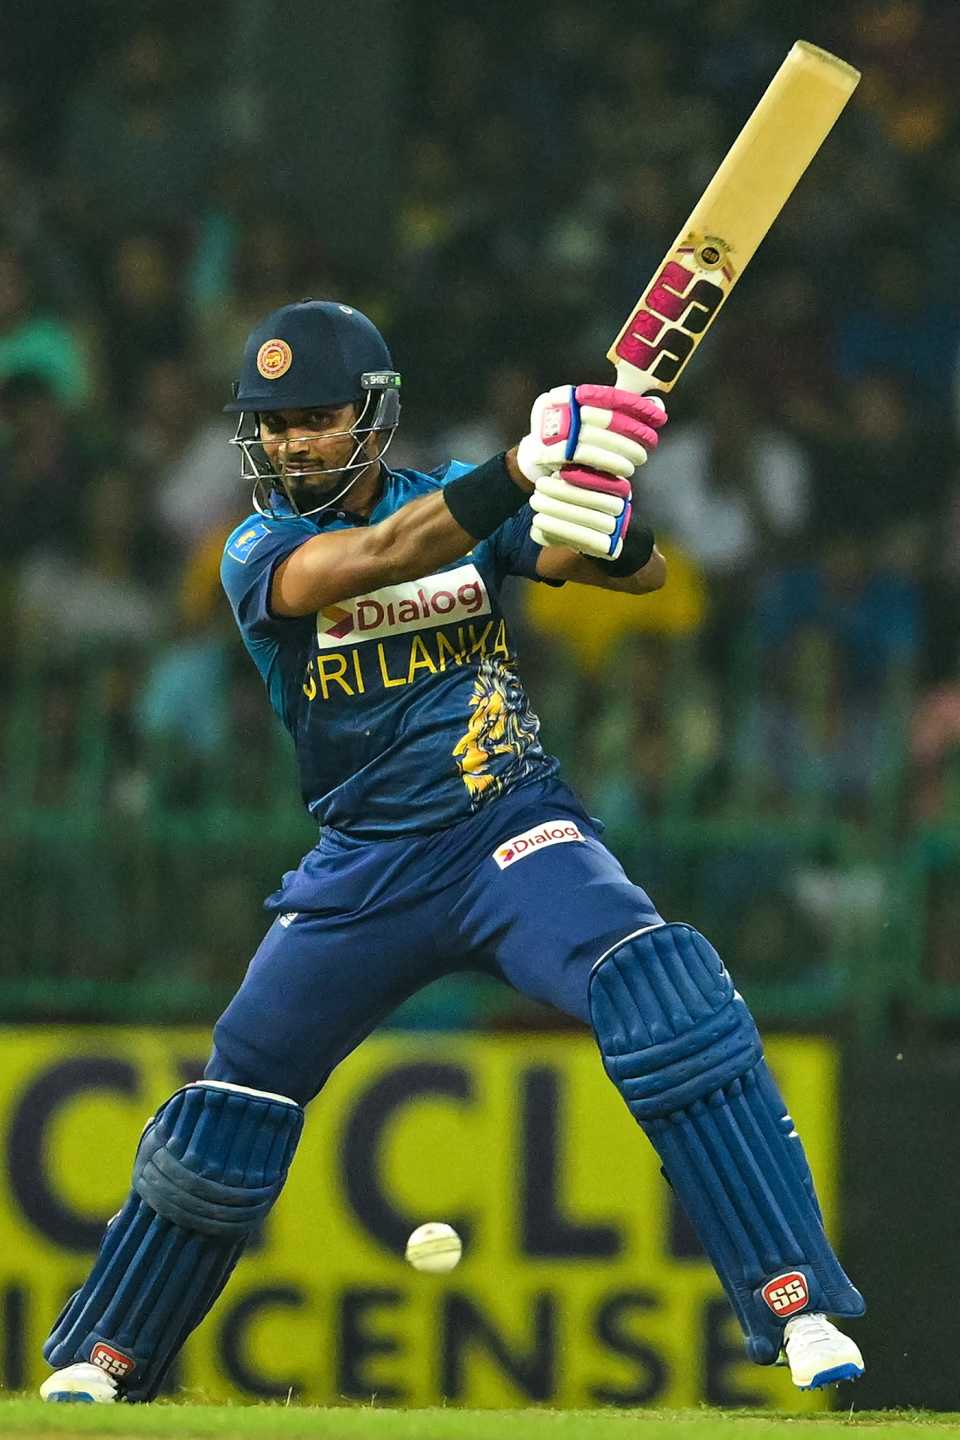 Dasun Shanaka played a crucial hand of 26 not out from 18 balls